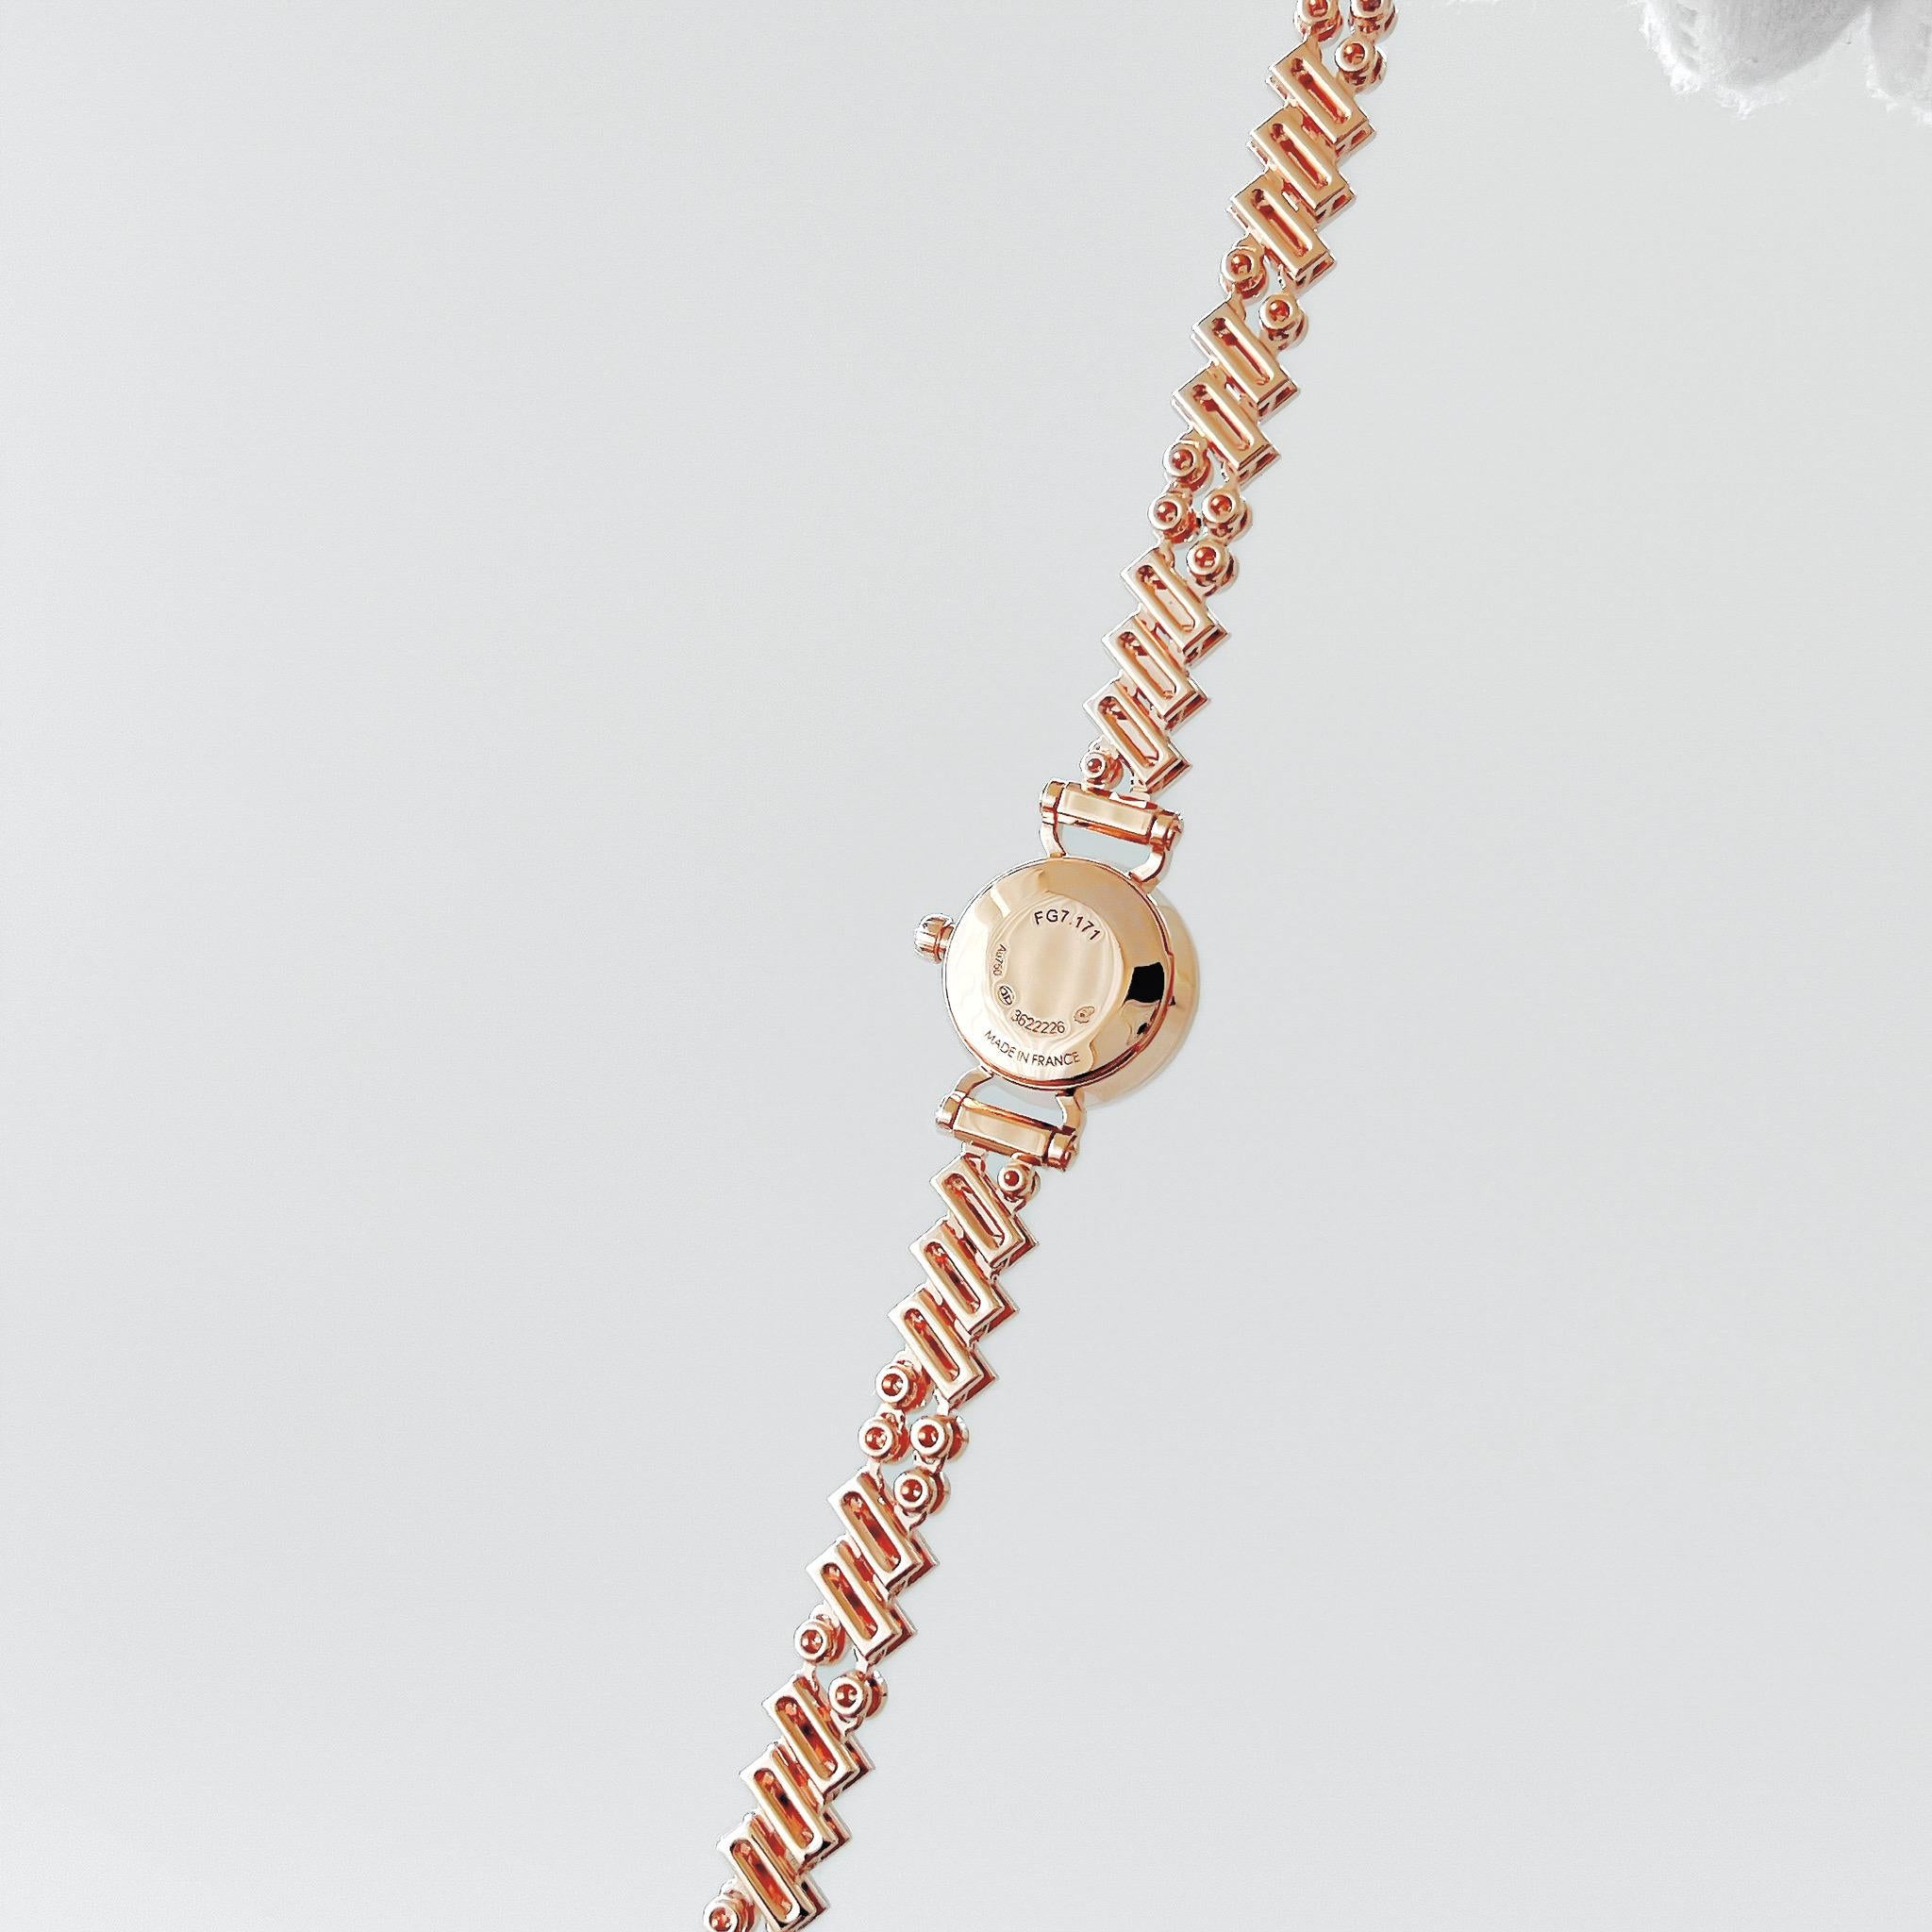 Shop this elegant Hermès Women's Faubourg Polka Watch in Rose Gold And Diamonds. This pretty watch comes in the mini model with a 15mm watch face. Coming in 18ct rose gold with 33 white diamonds (0.2 ct), which are set into a mother-of-pearl dial.